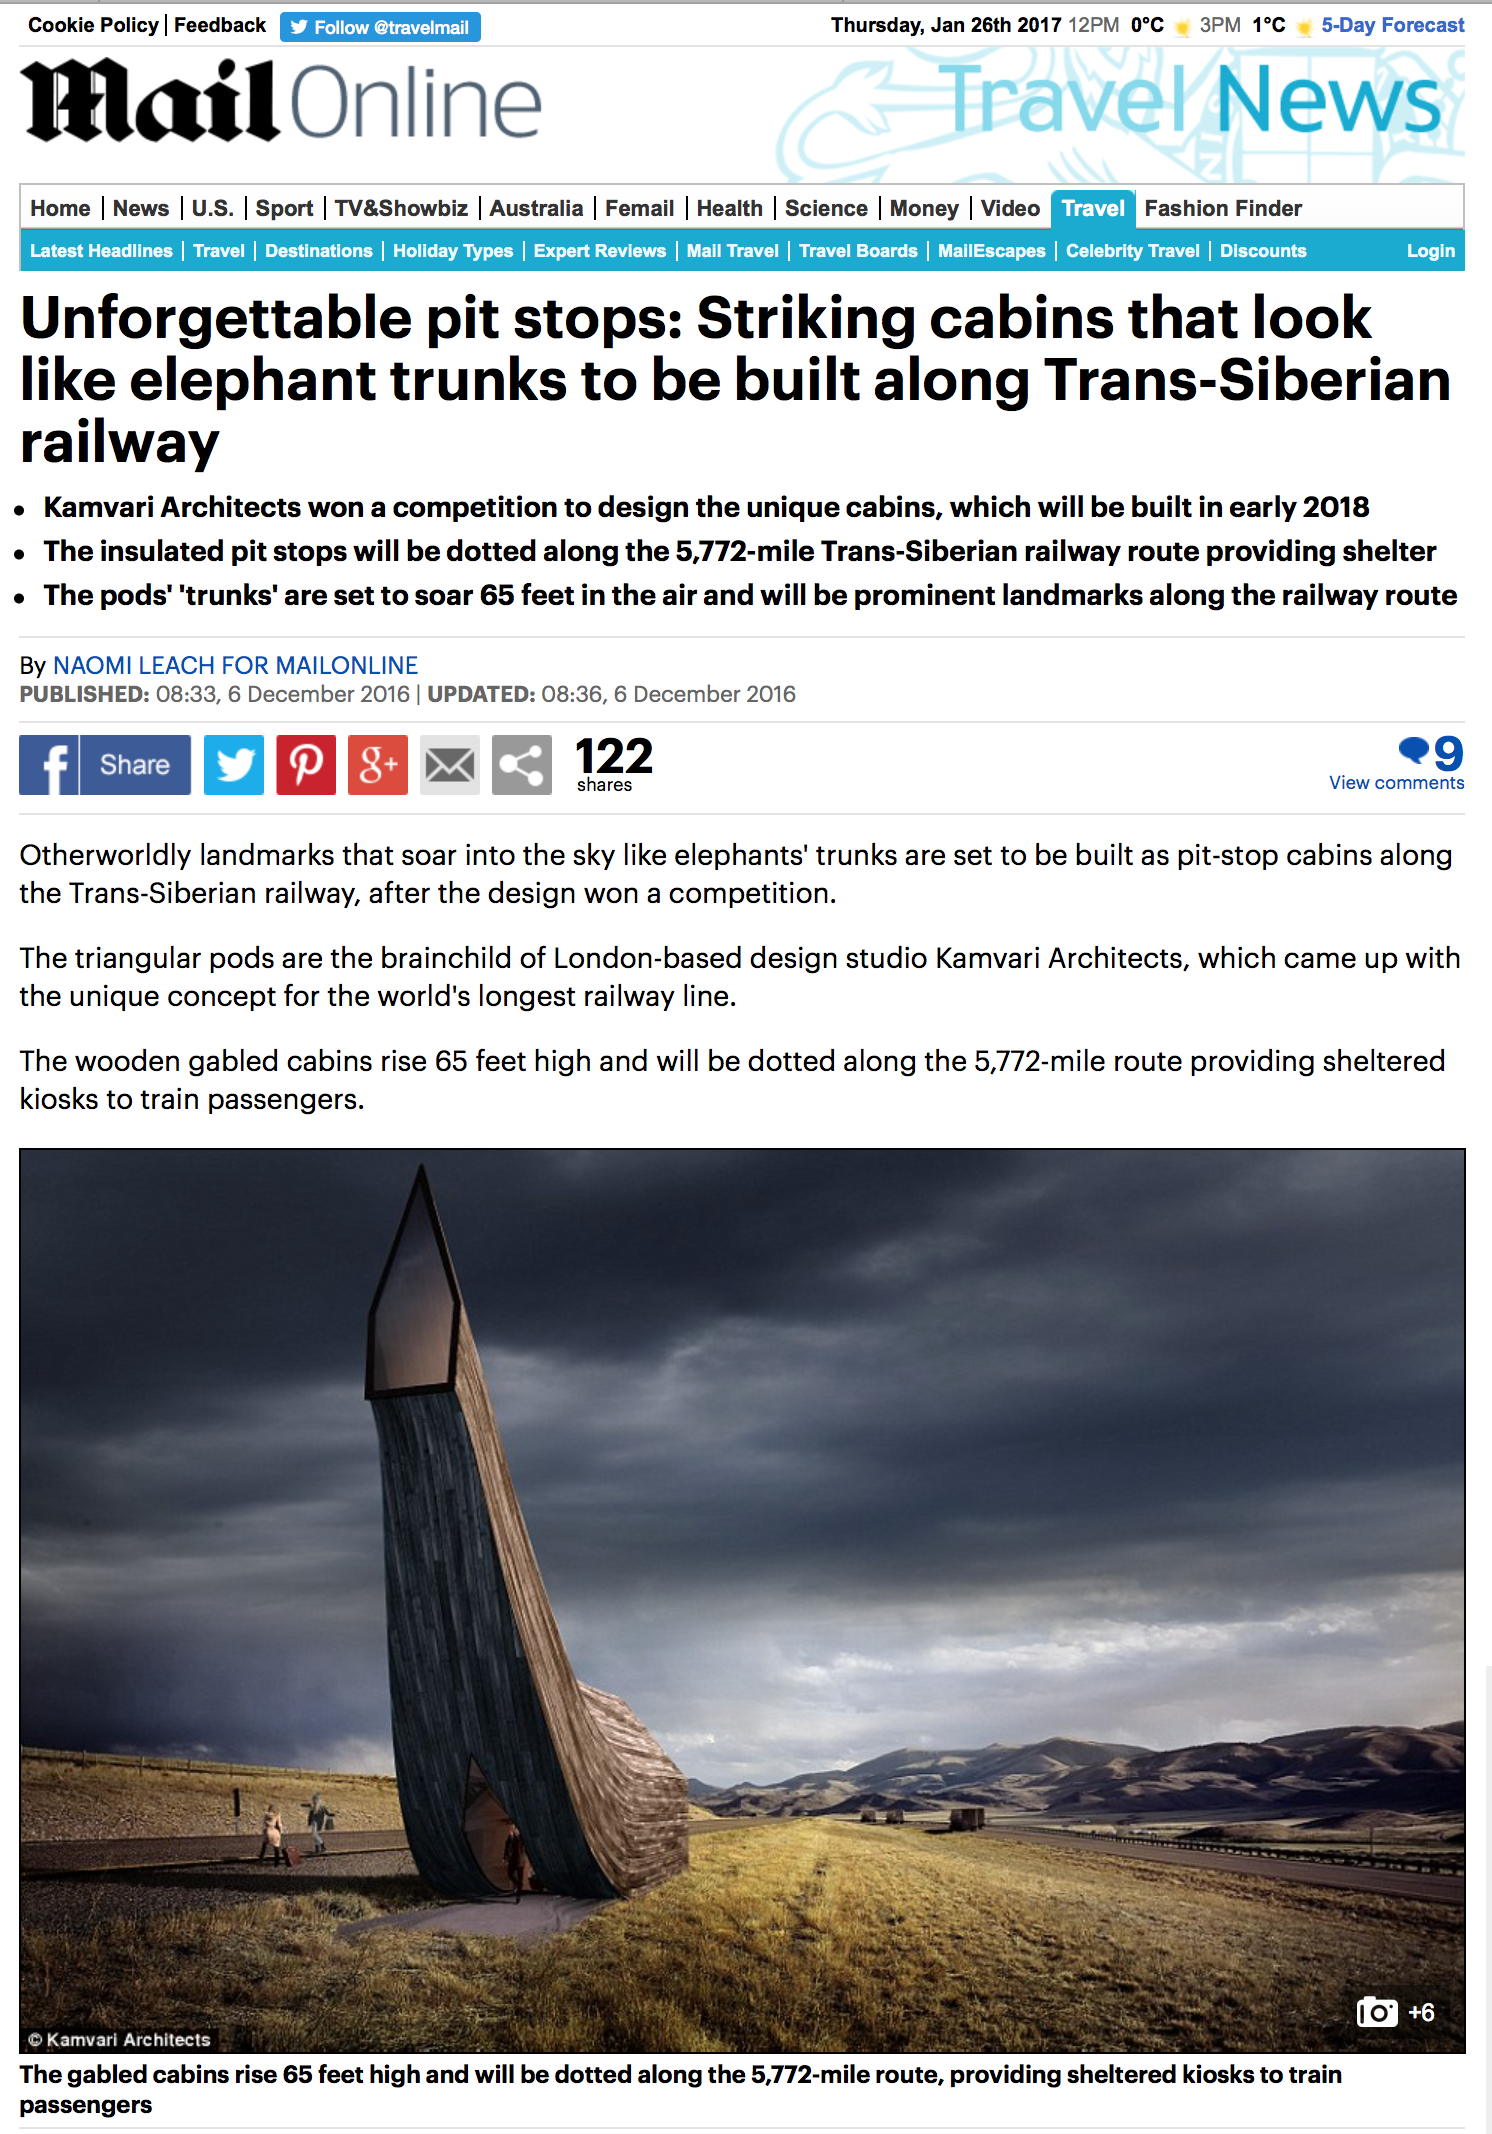 The Daily Mail, Unforgettable pit stops: Striking cabins that look like elephant trunks to be built along Trans-Siberian railway